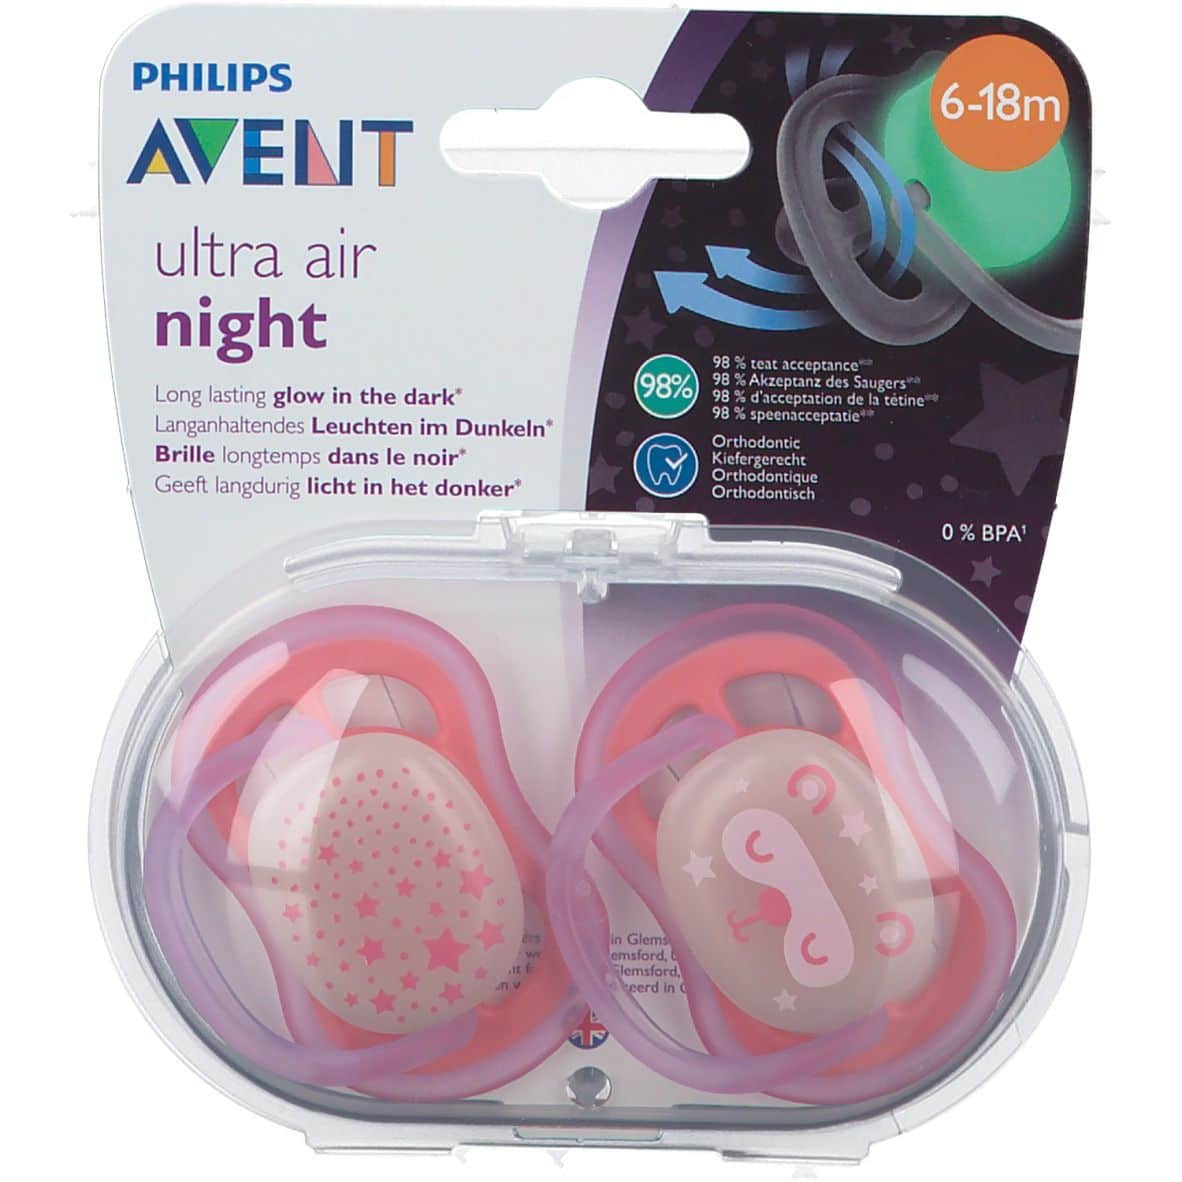 PHILIPS AVENT - Tétines ultra soft 0-6 mois Rose…